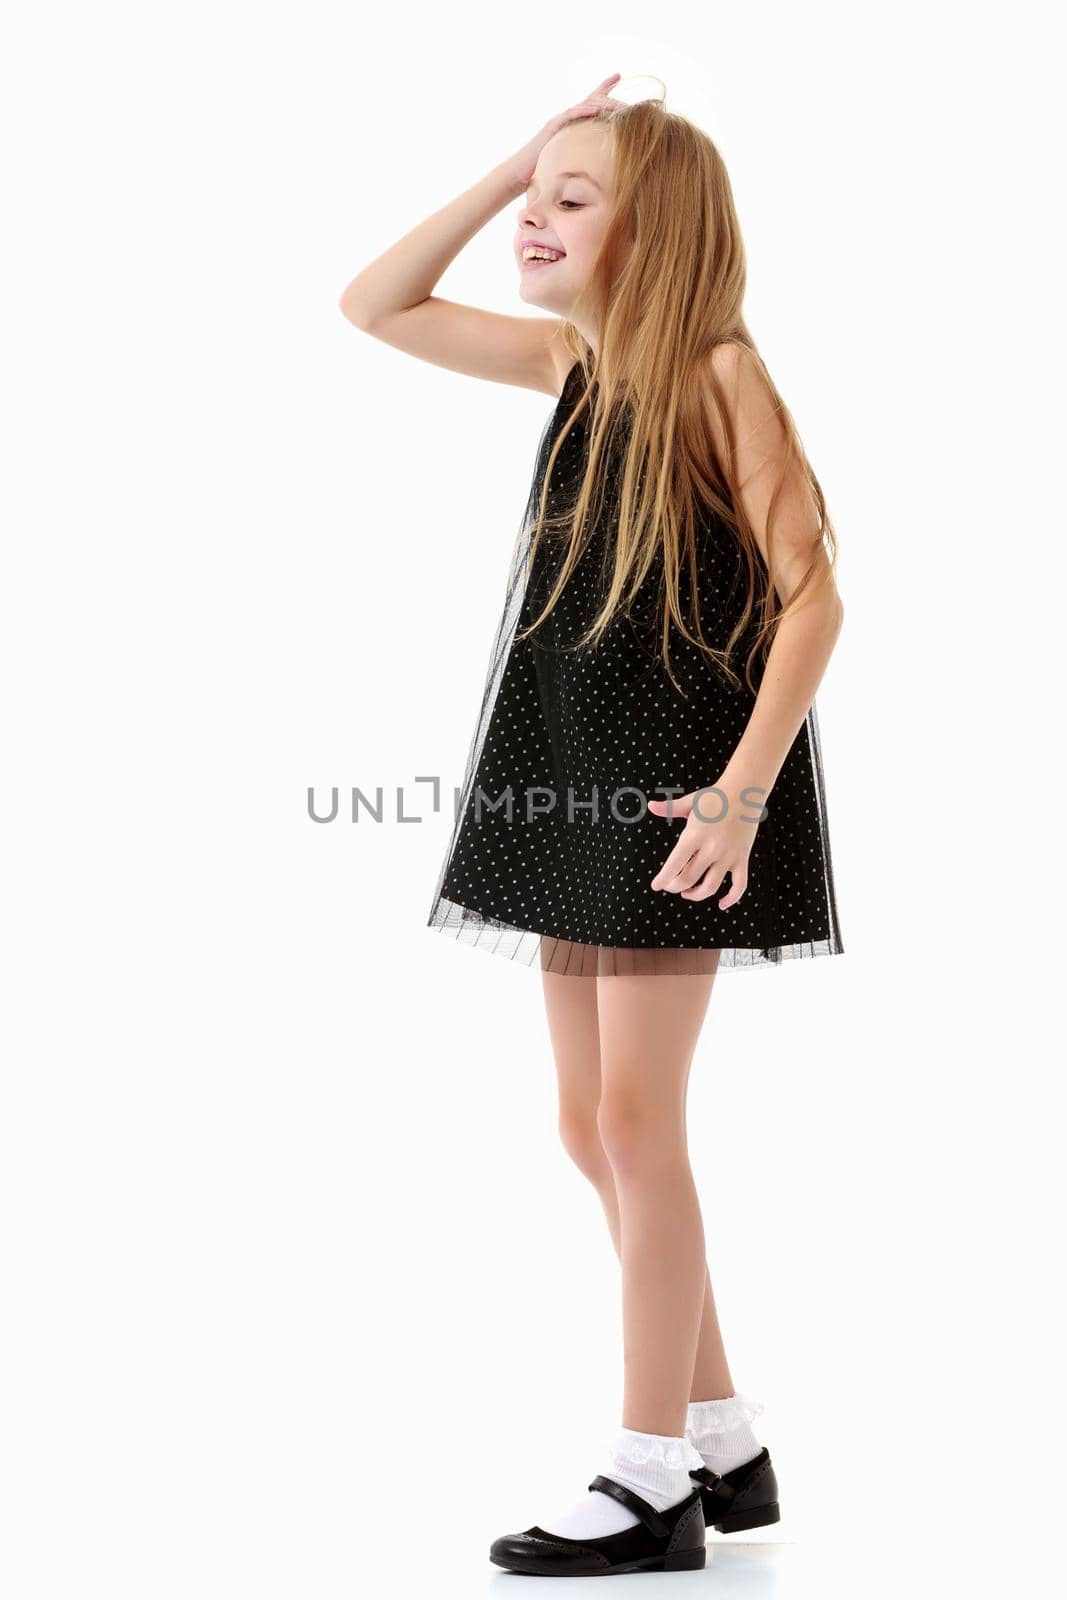 A sweet girl straightens her hair. The concept of fashion and style. Isolated over white background